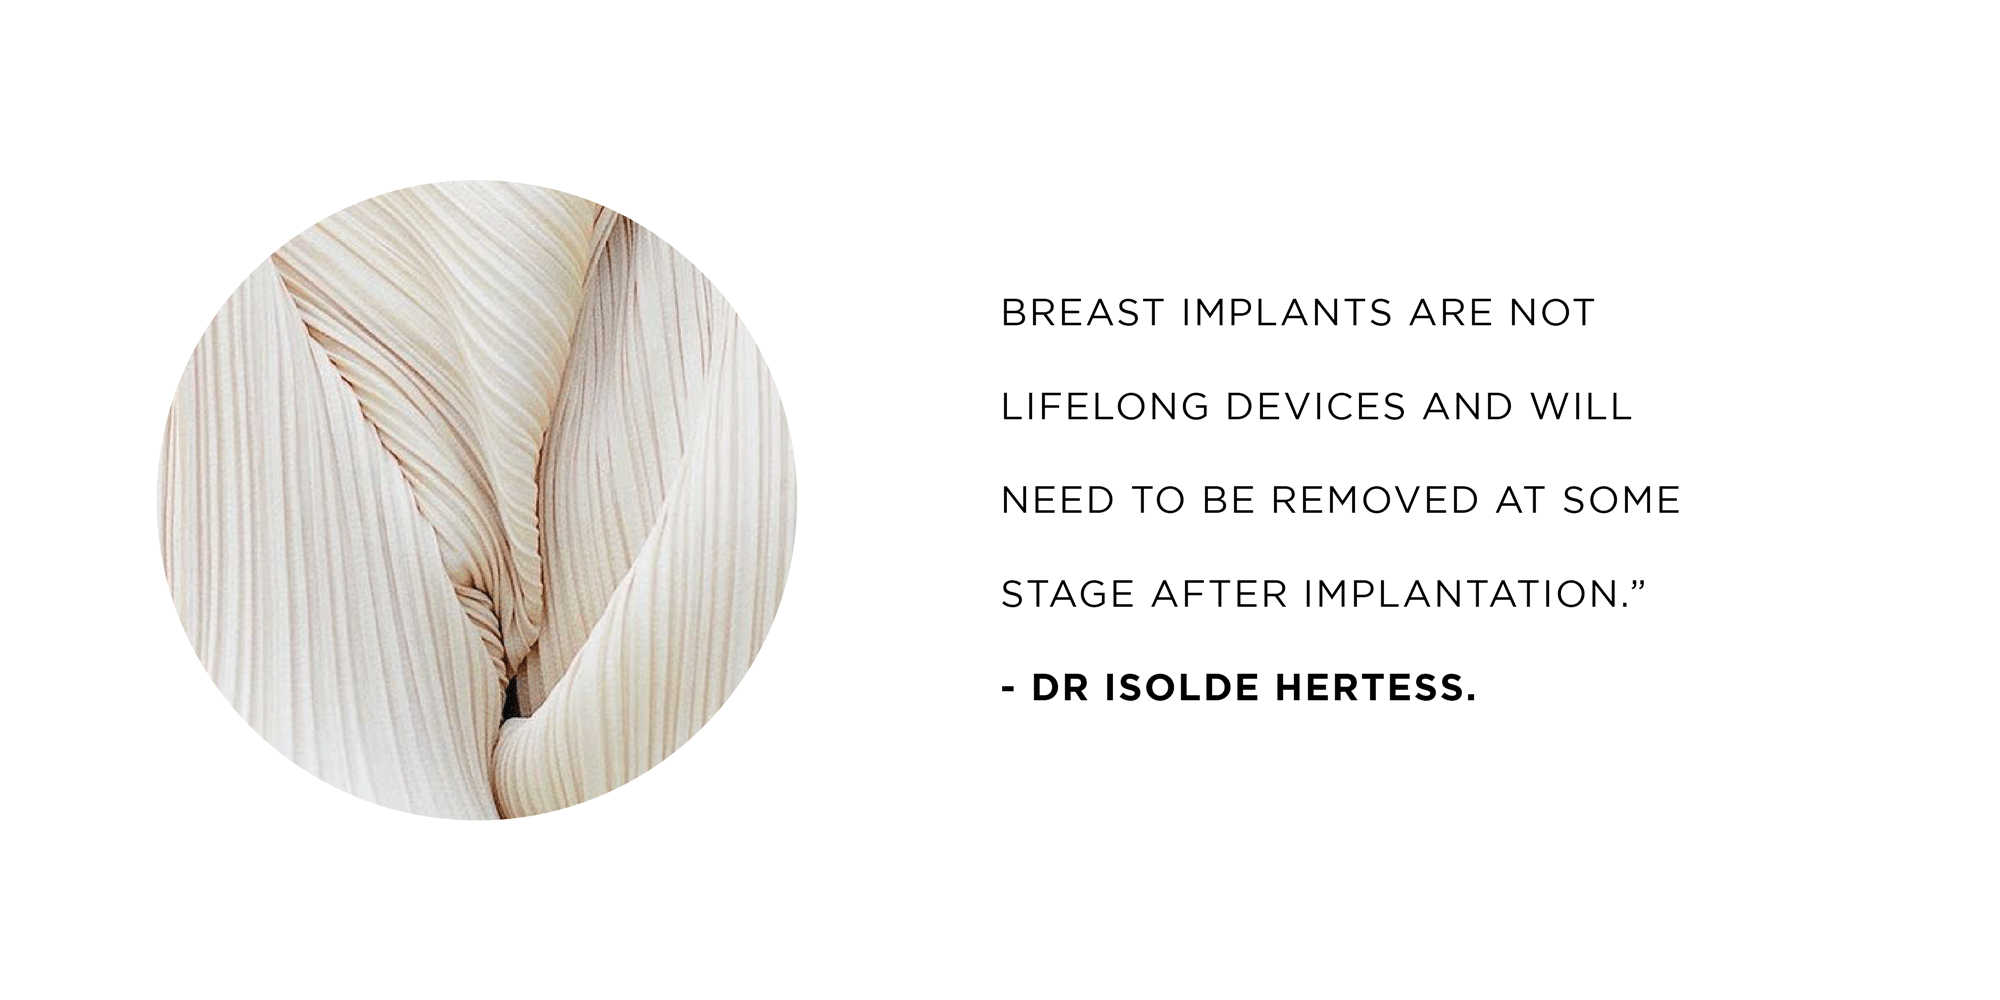 Breast implants are not a lifelong device